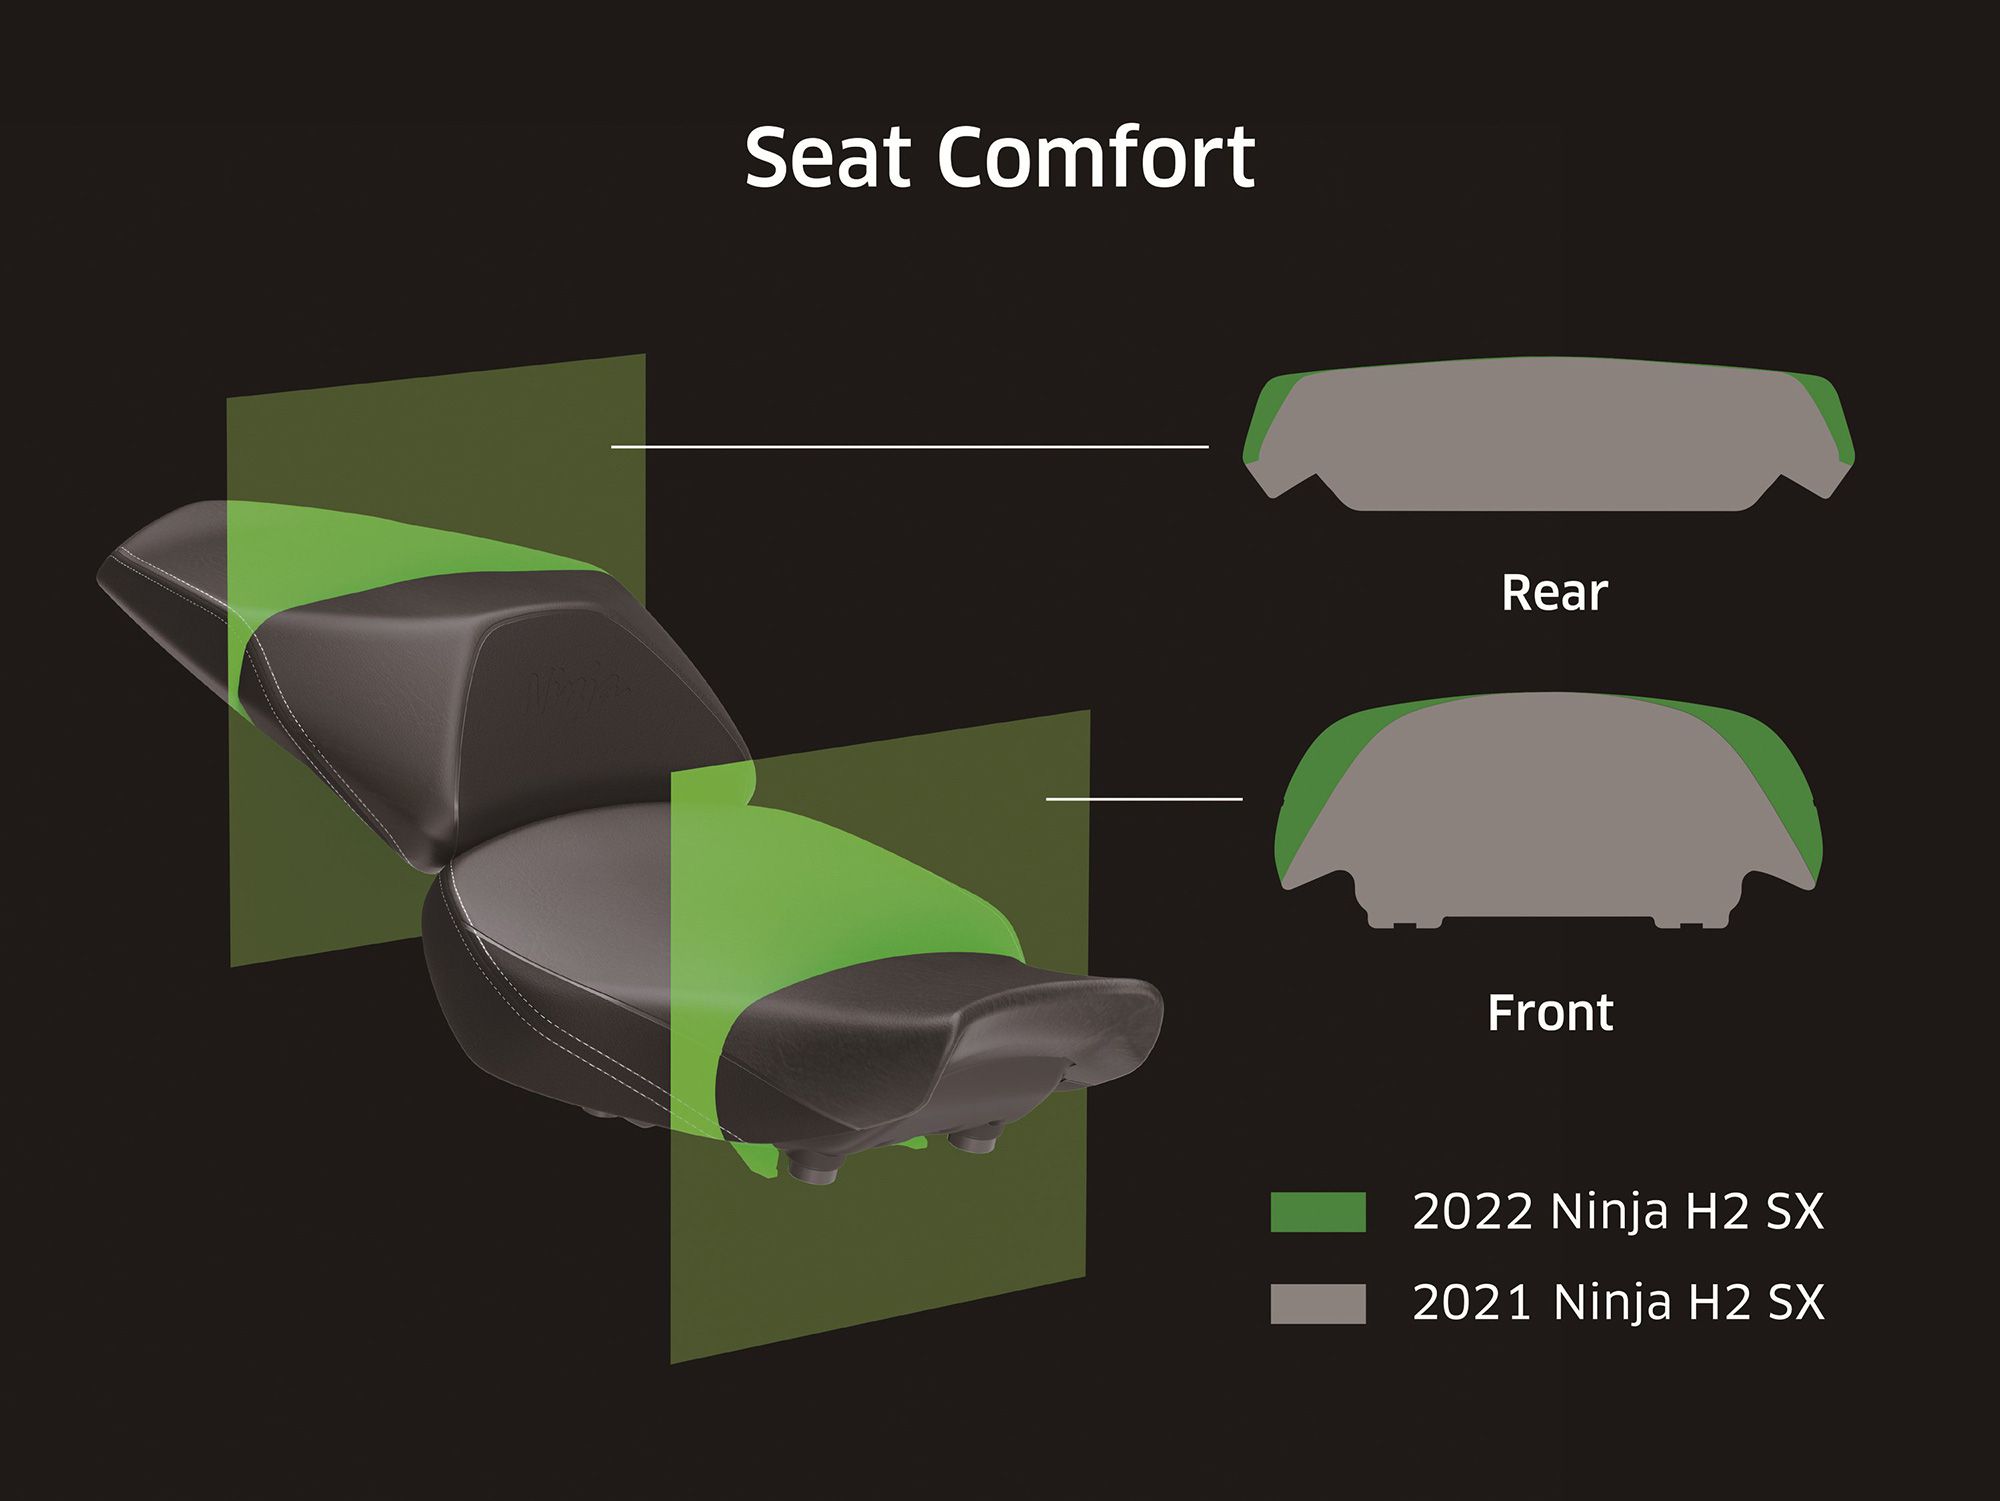 Kawasaki widened the seat for 2022 to give riders and passengers a more comfortable perch.